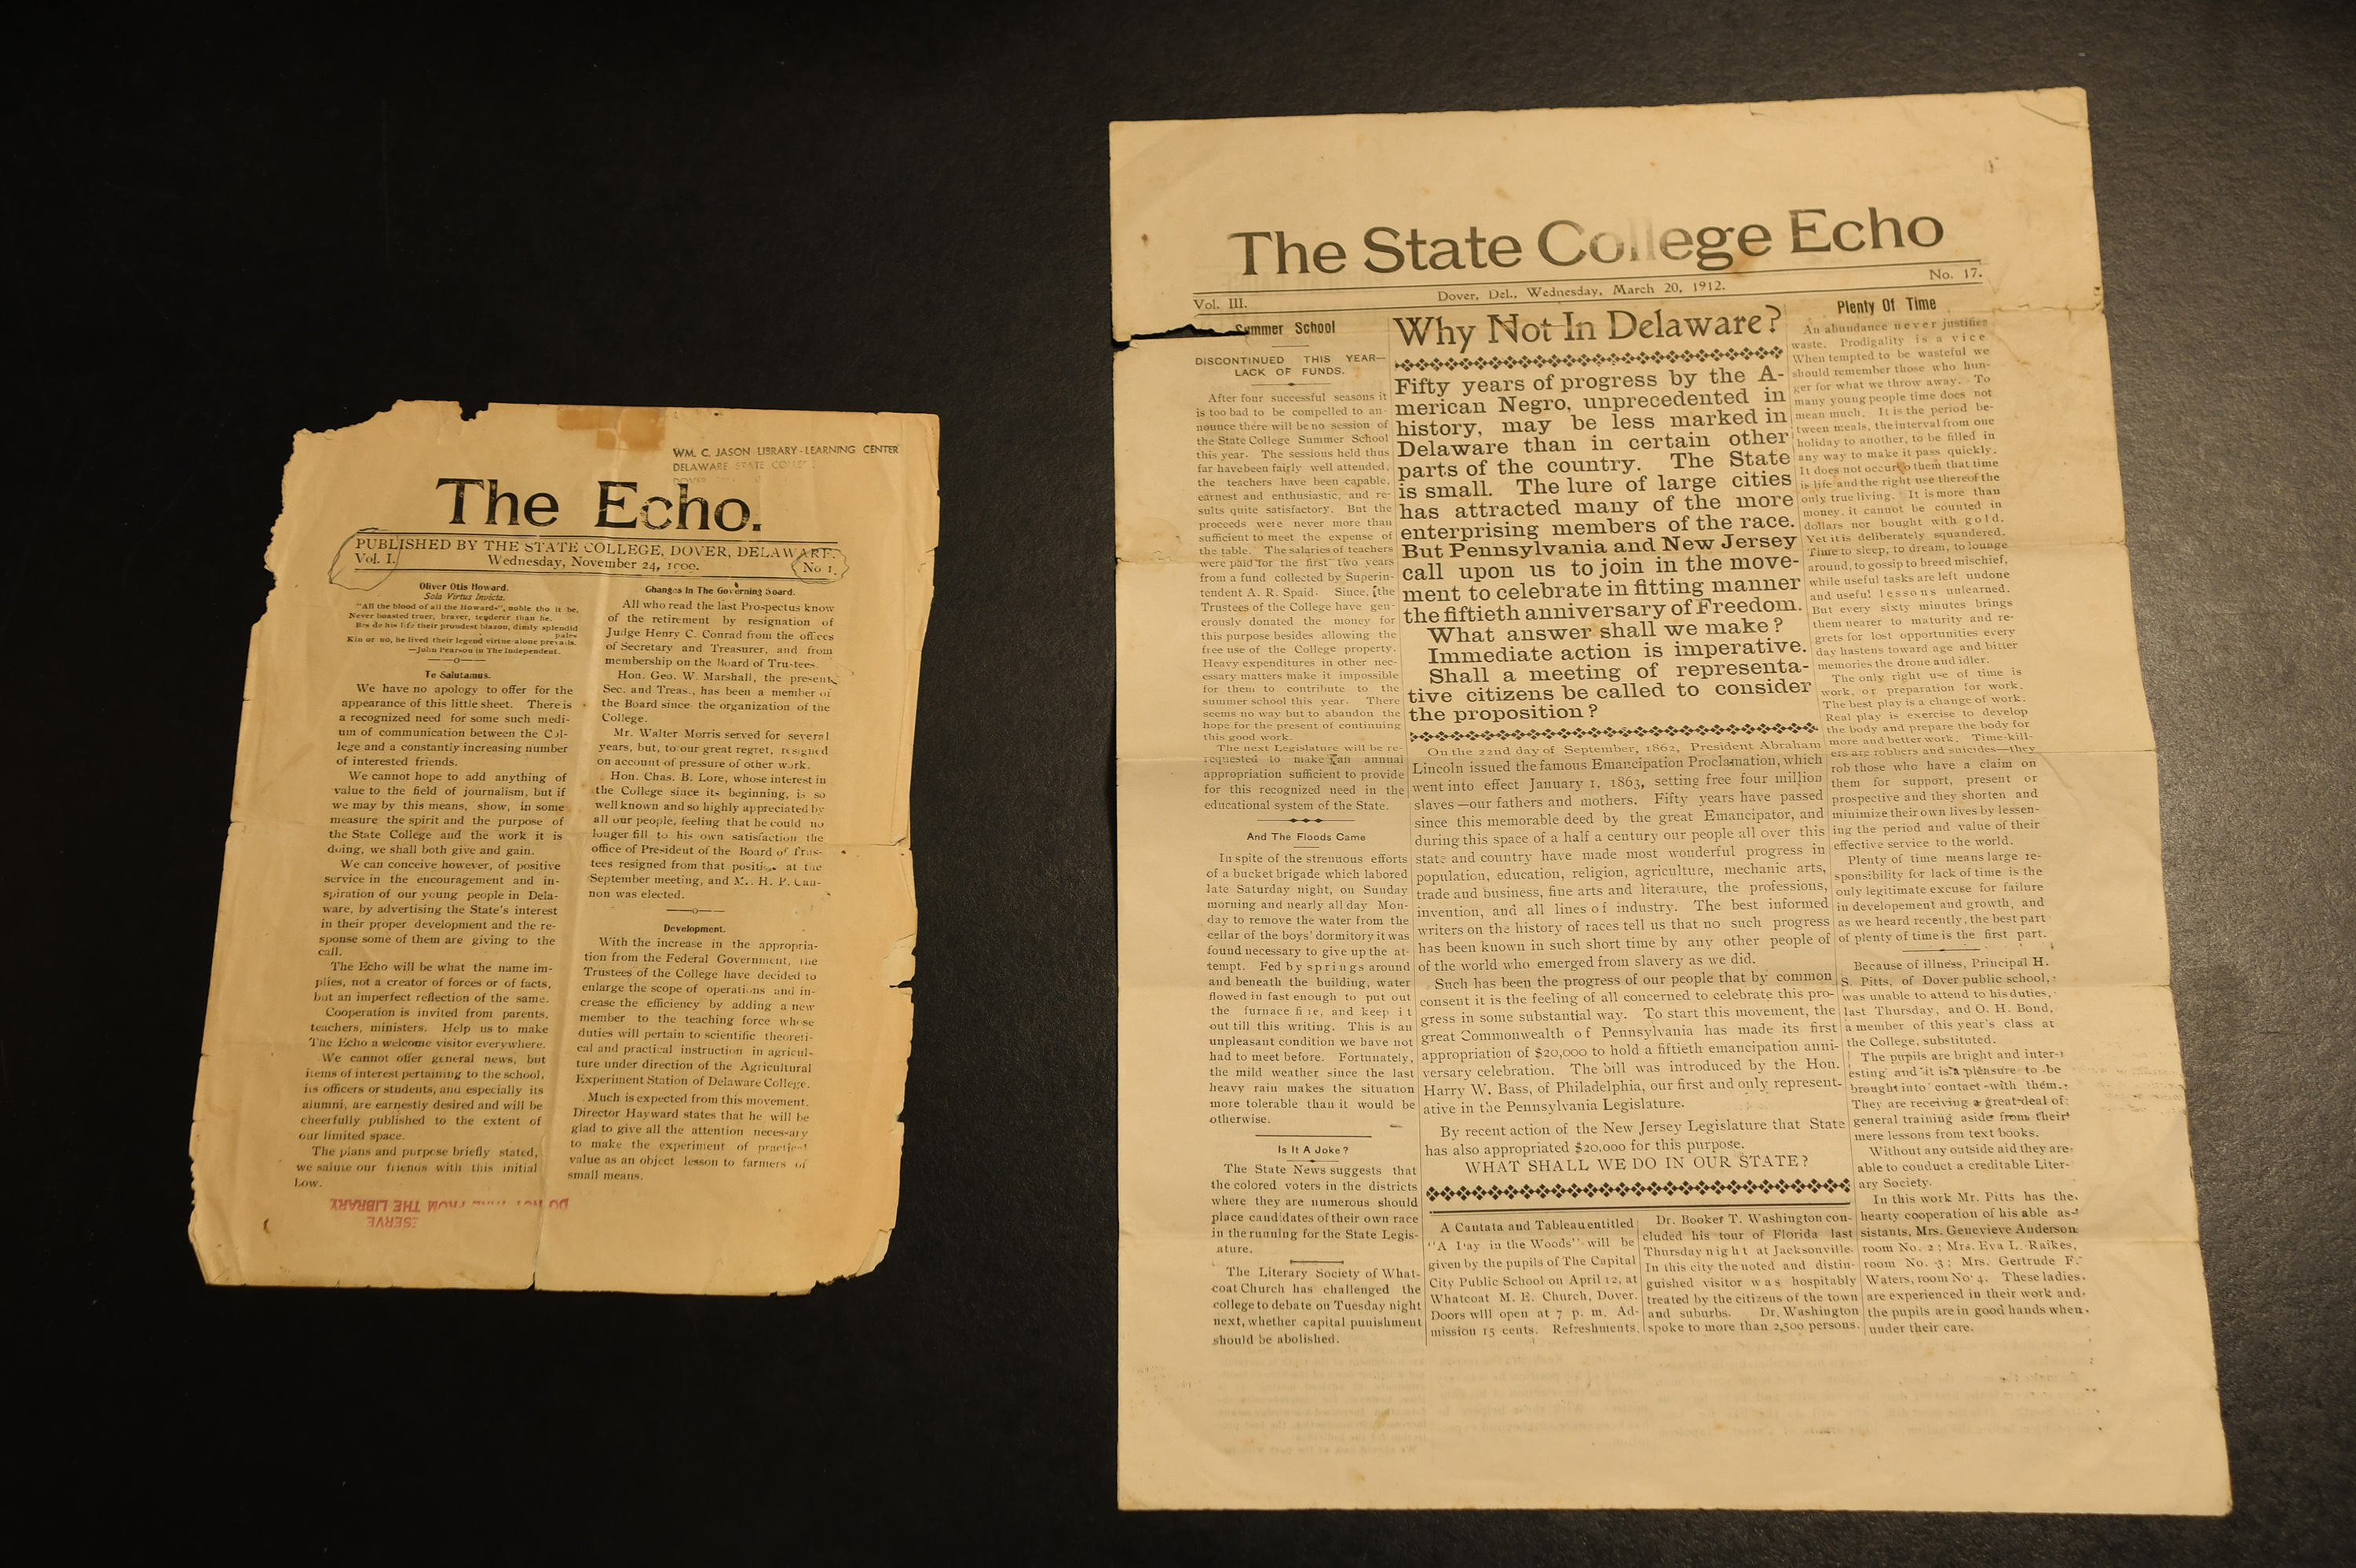 The College's purchase of a another printing press made it possible to expand the newsletter into newspaper size publication.